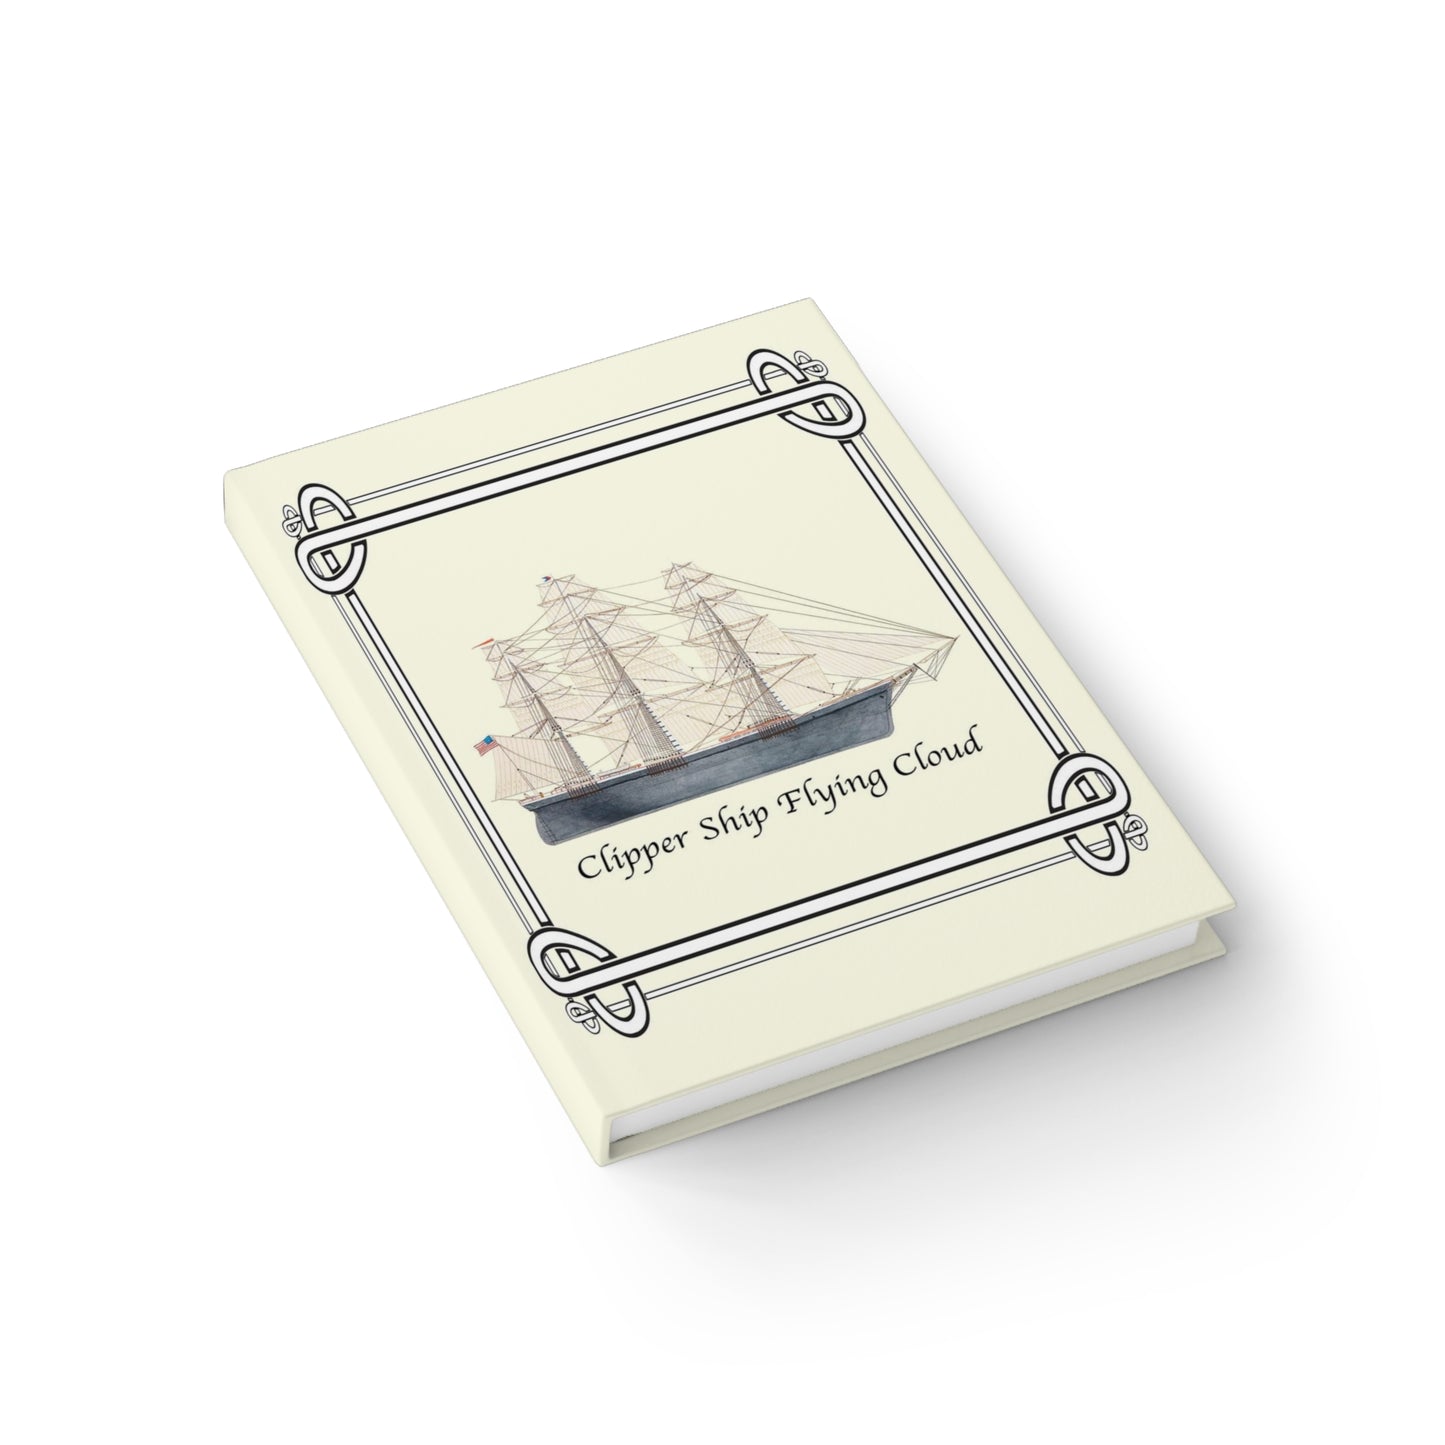 Clipper Ship Flying Cloud Lined Page Journal